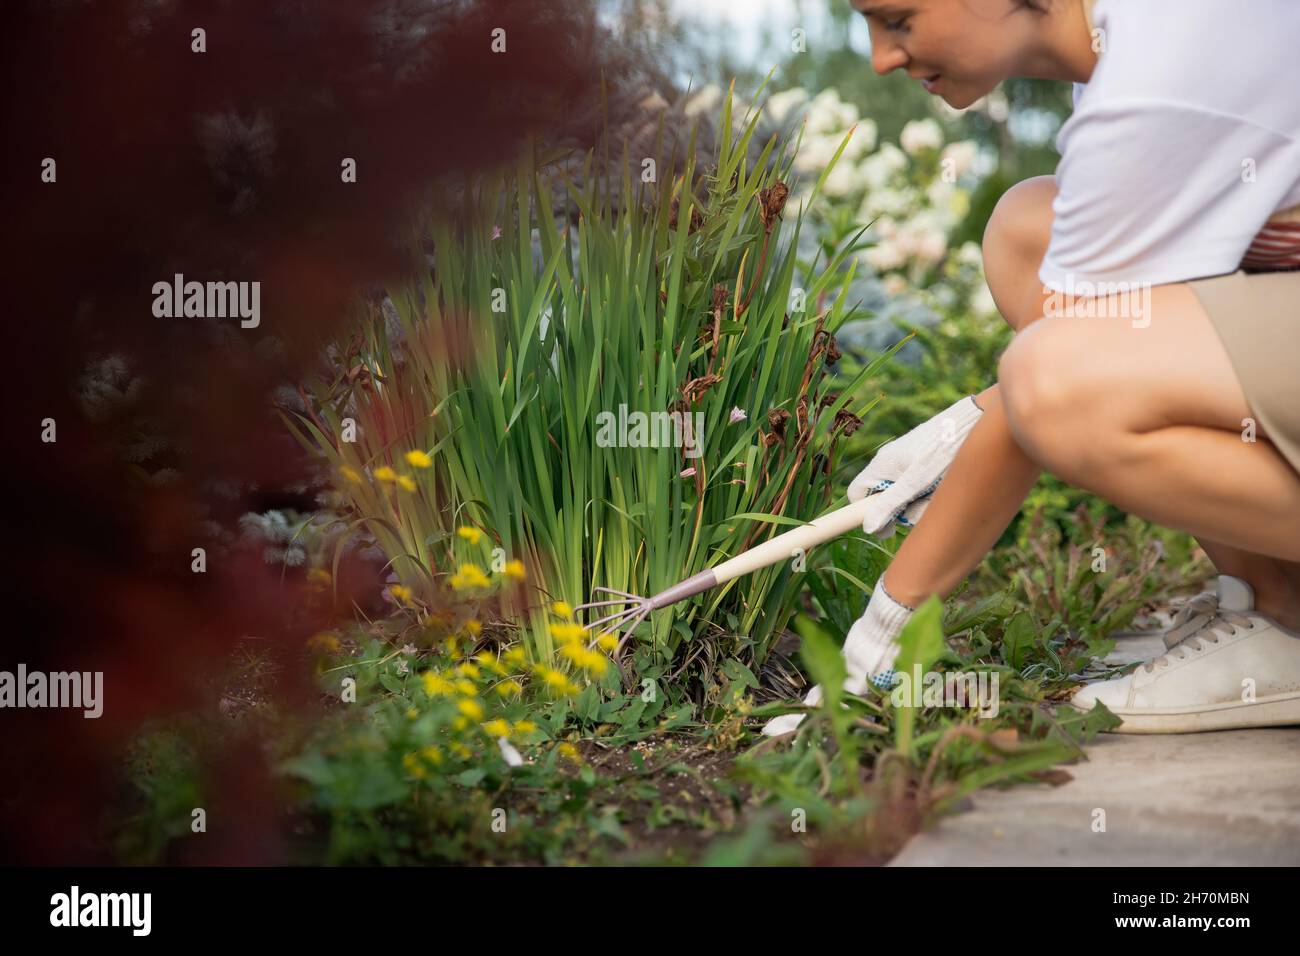 Woman works with mini rake in garden, removes weeds, cuts through plants and flowers. Stock Photo